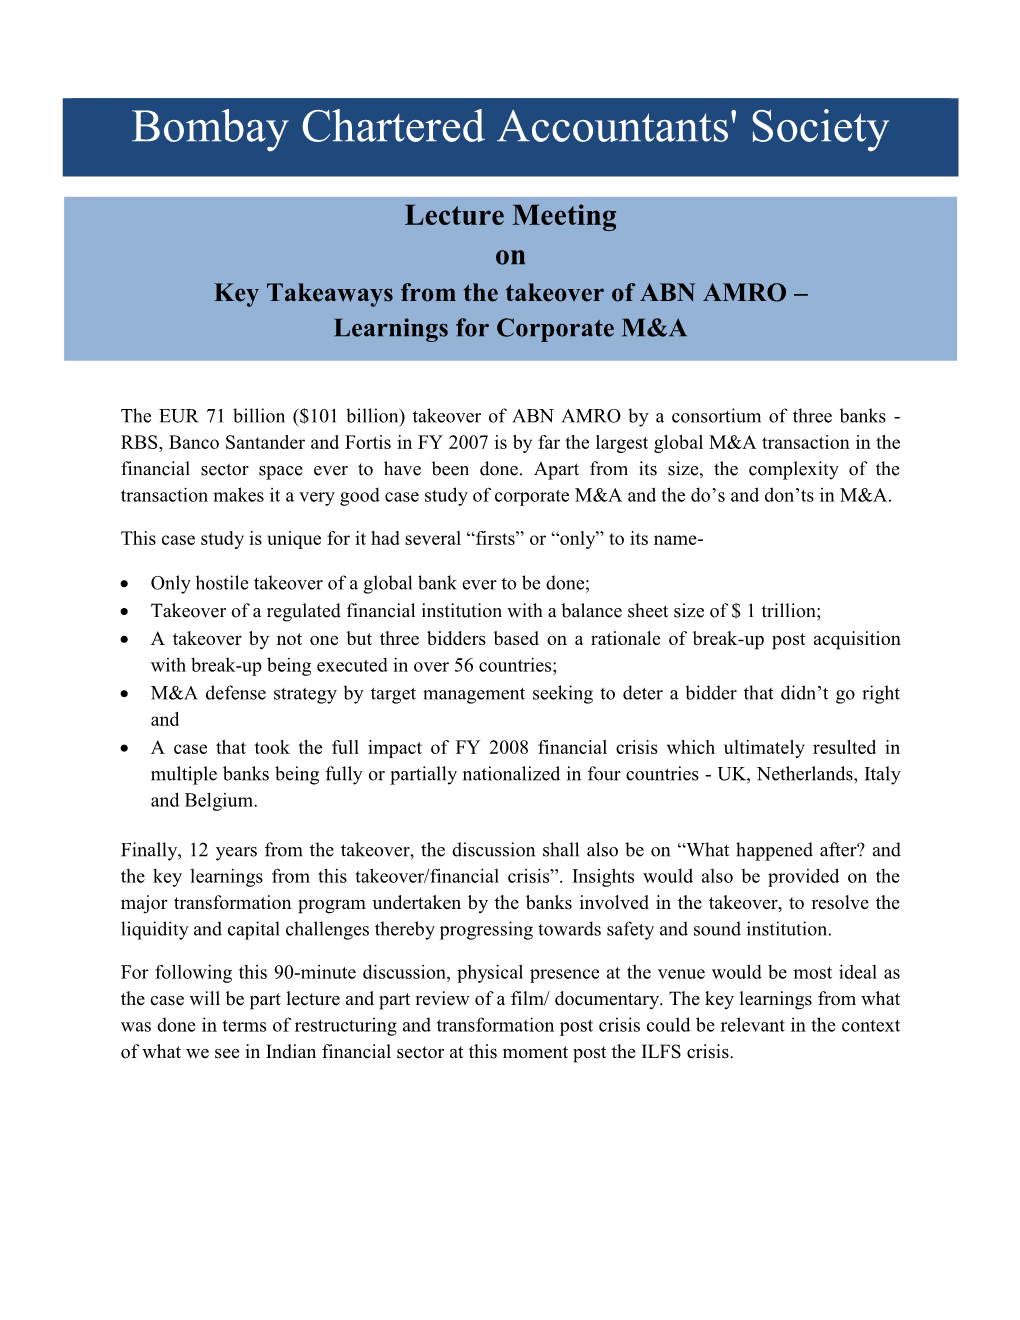 Learnings for Corporate M&A